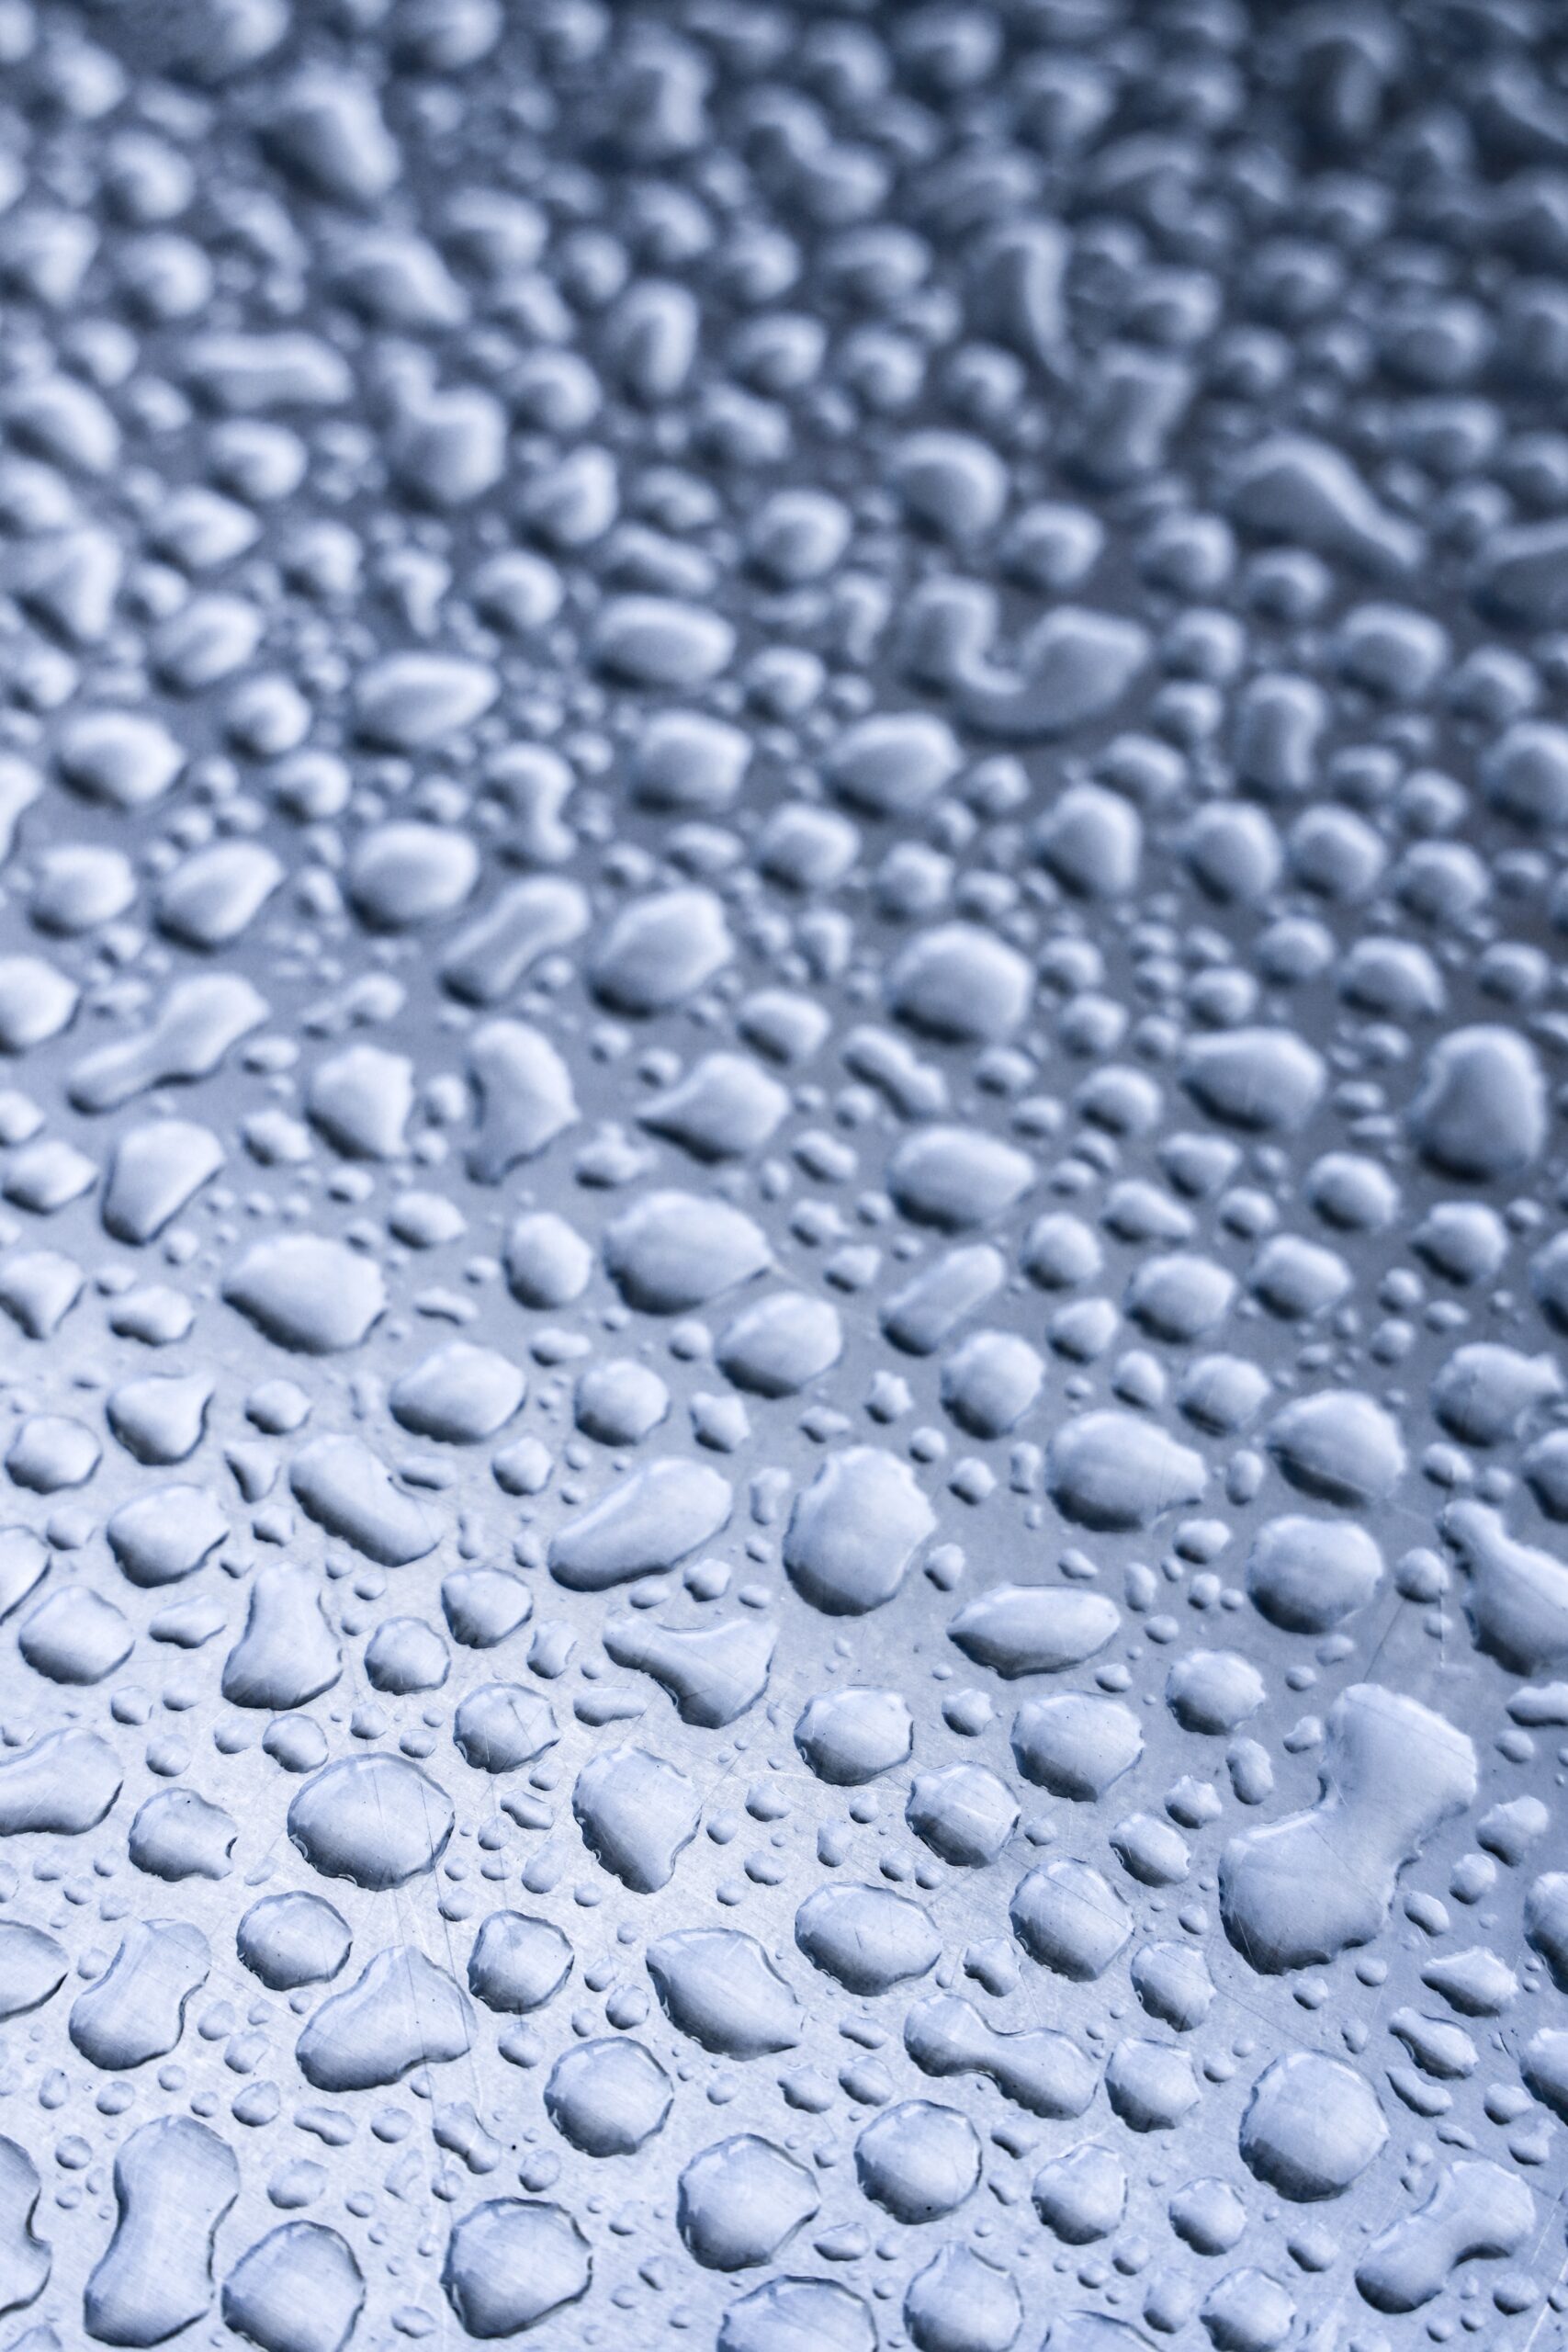 Rain drops up close by pat whelen from Unsplash